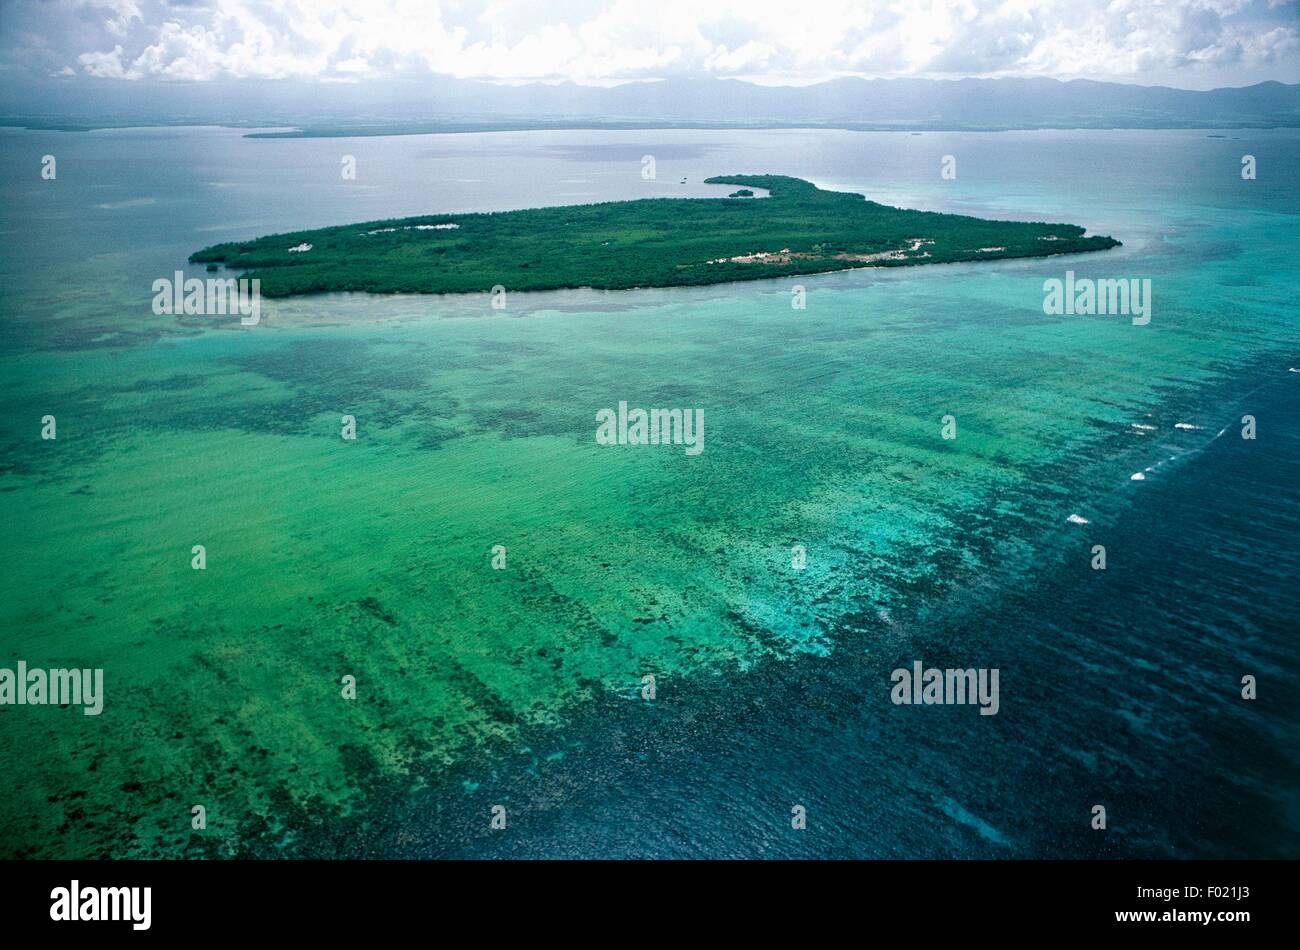 Aerial view of Protected Area Reserve du Grand Cul de Sac Marin - Fajou Island, Guadeloupe (Overseas department of France) Stock Photo